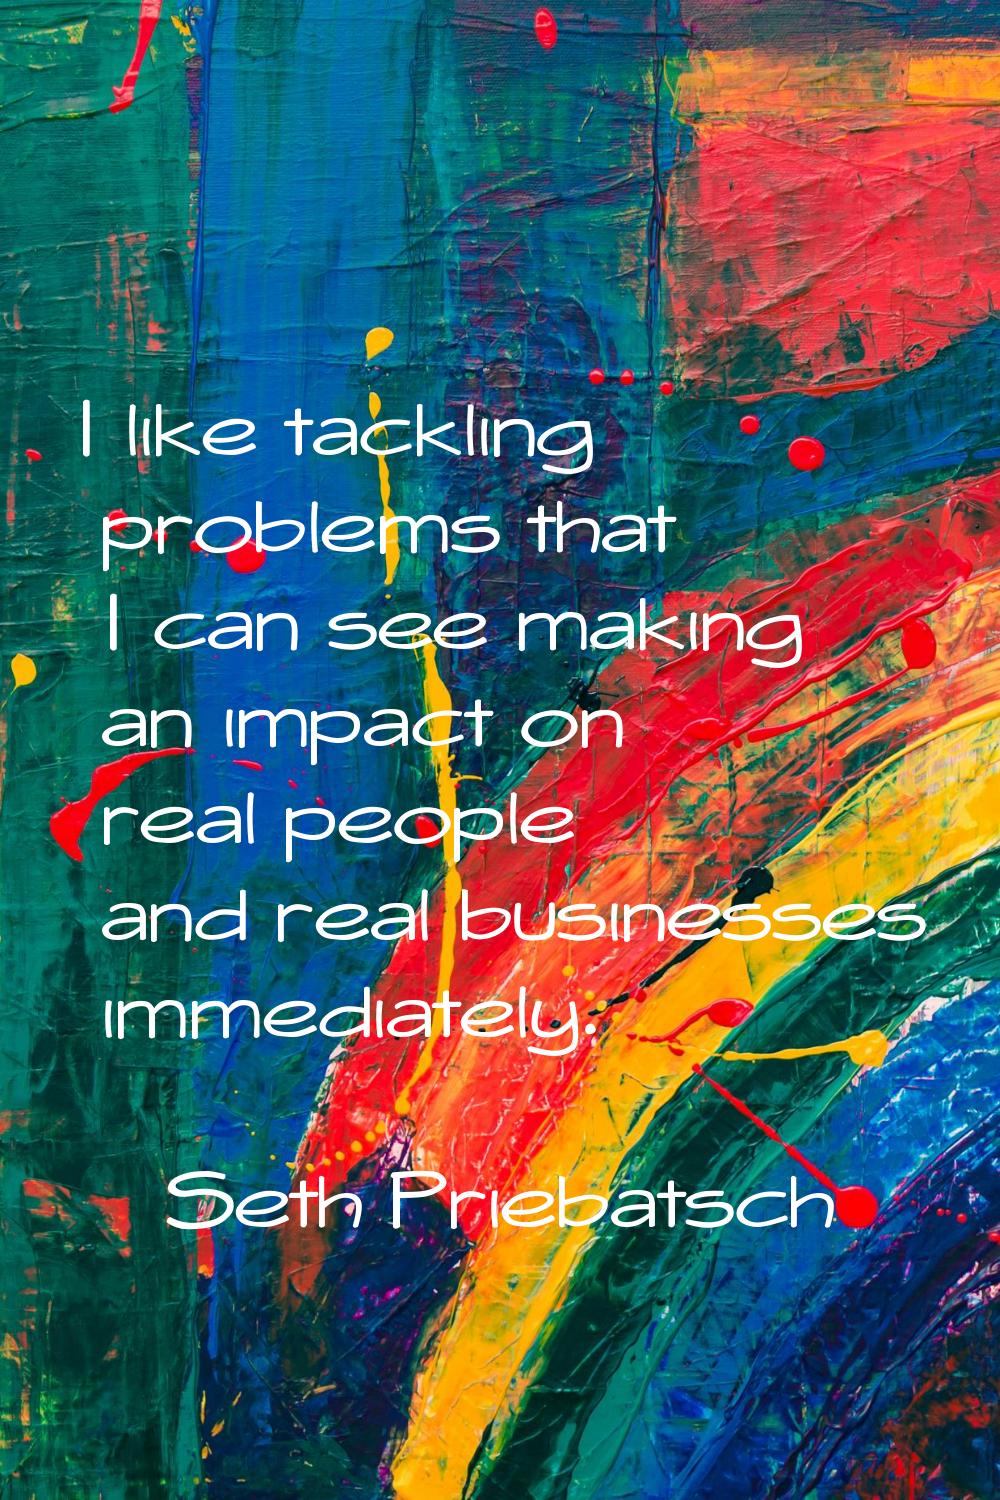 I like tackling problems that I can see making an impact on real people and real businesses immedia